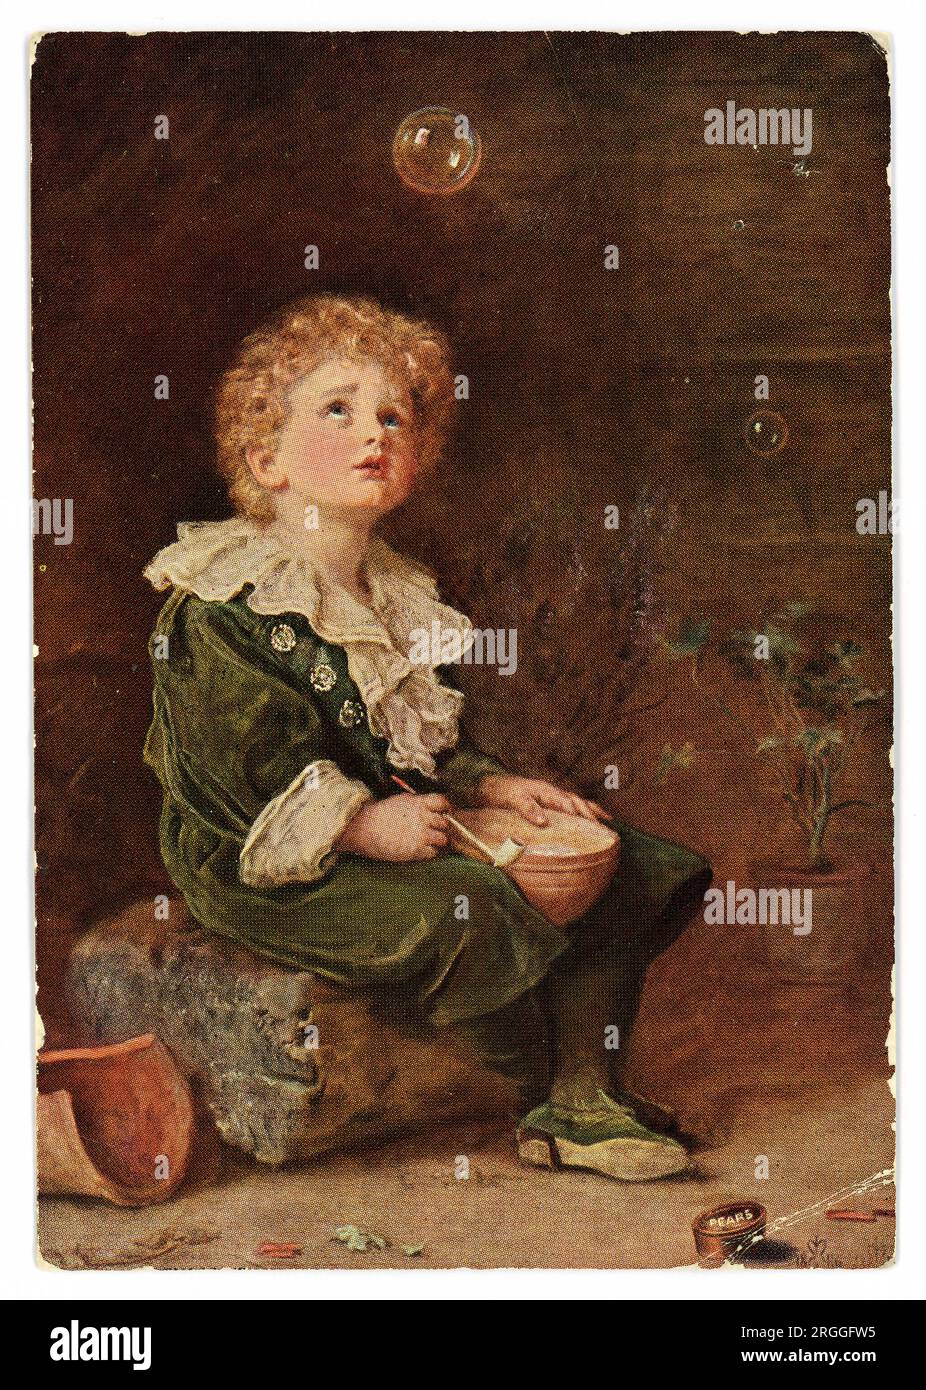 Original 1900's postcard promo card for Pear's soap - illustration of an angelic Victorian child Victorian boy, blowing bubbles with clay pipe was taken from an1886 painting by Sir John Everett Millais originally titled a Child's World, but renamed Bubbles once it was sold to Pears for the famous Pear's soap advert. A bar of Pears soap can be seen in the bottom right of the picture. This painting  became one of the most reproduced advertising images ever. It depicts Millais’s four-year-old grandson William Milbourne James. Millais was the youngest ever member of the British Royal Academy. U.K. Stock Photo